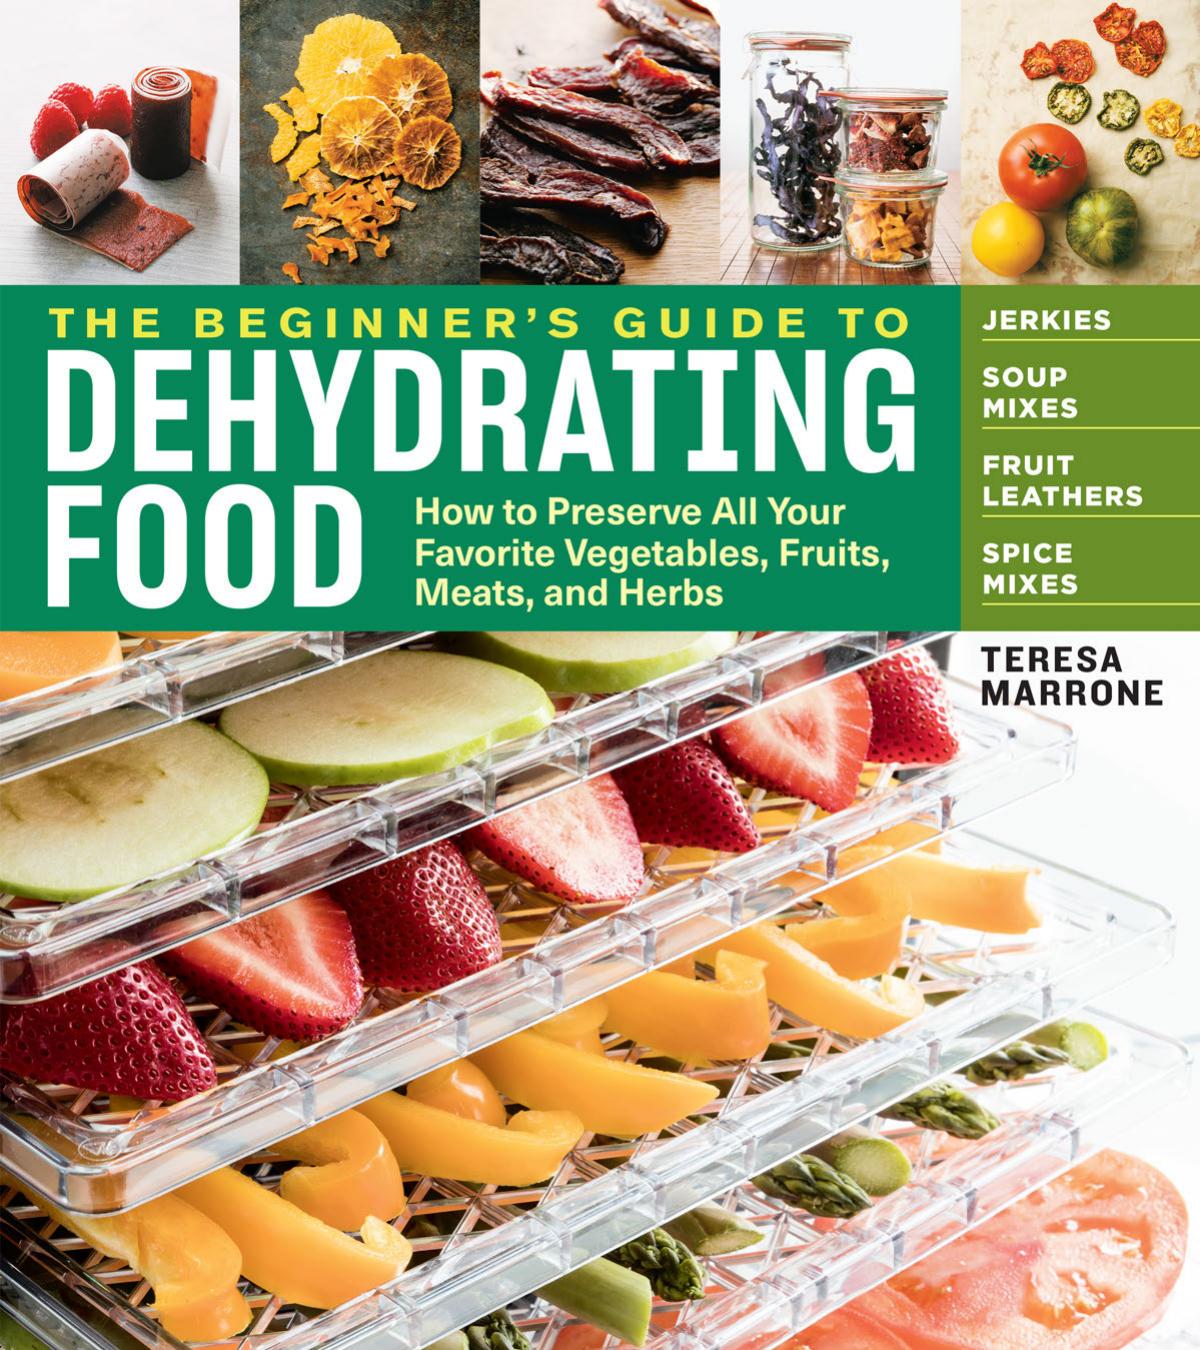 The Beginner's Guide to Dehydrating Food by Teresa Marrone